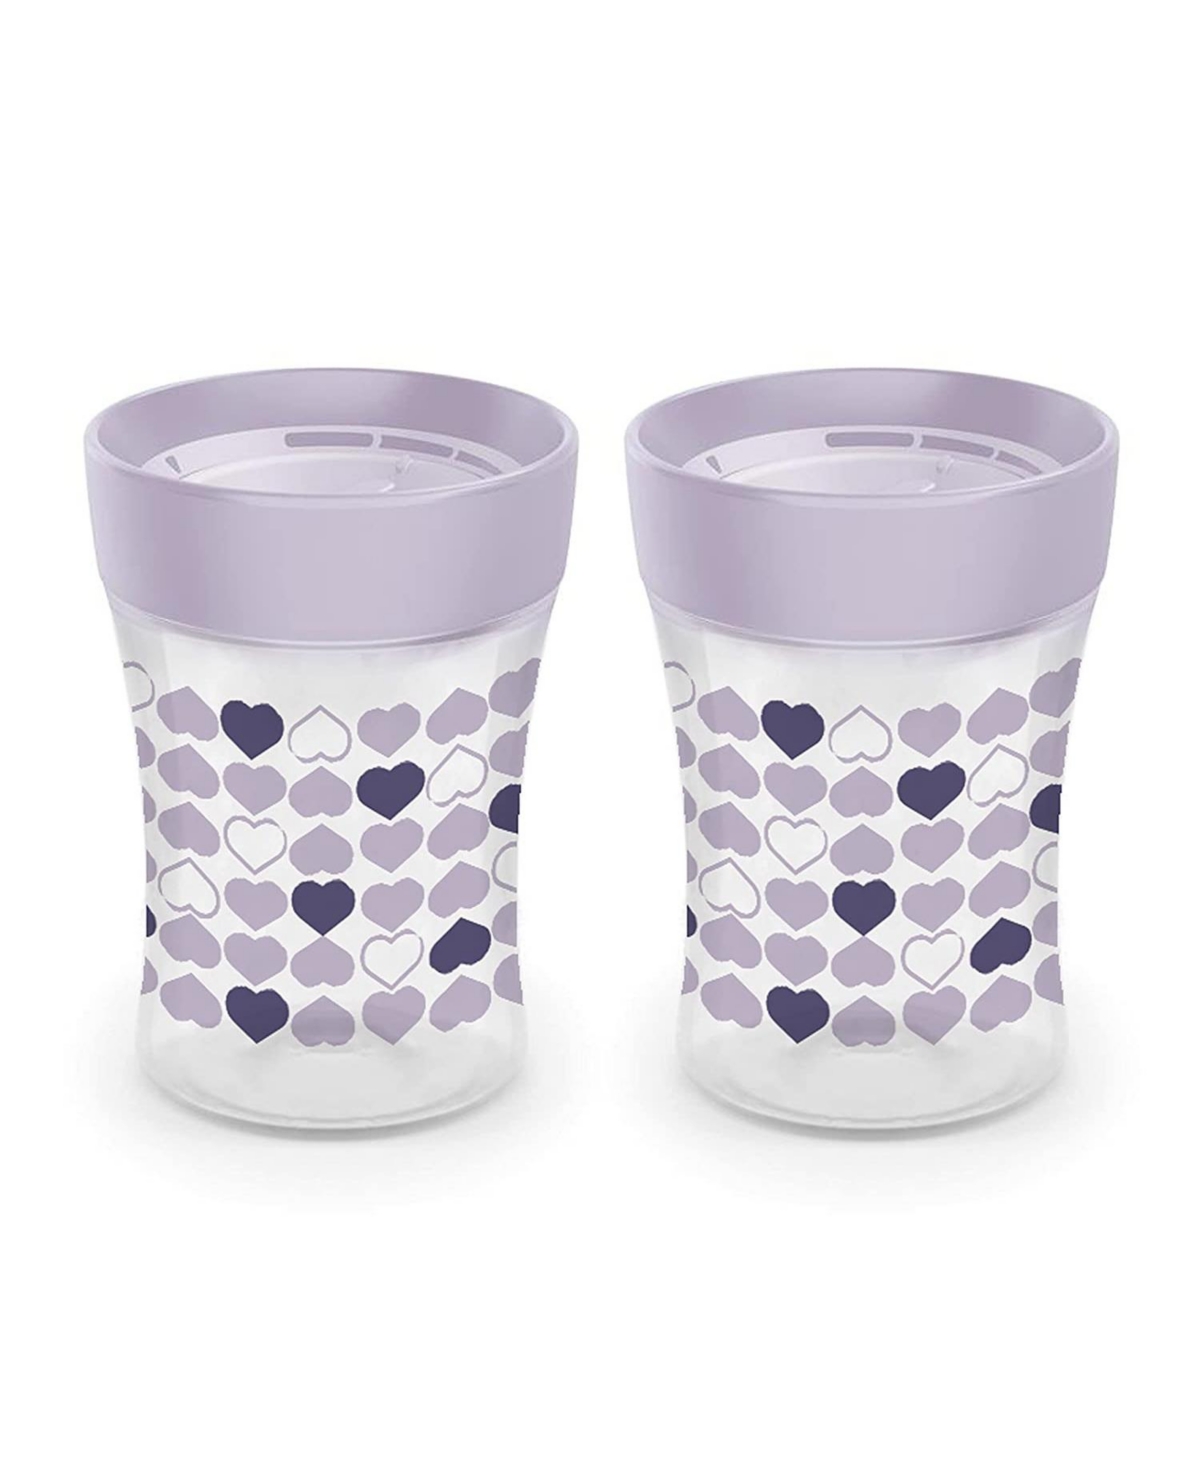 Nuk Toddler Sip Trainer Cup, Flow Control, 2 Pack, 8oz, Purple Hearts